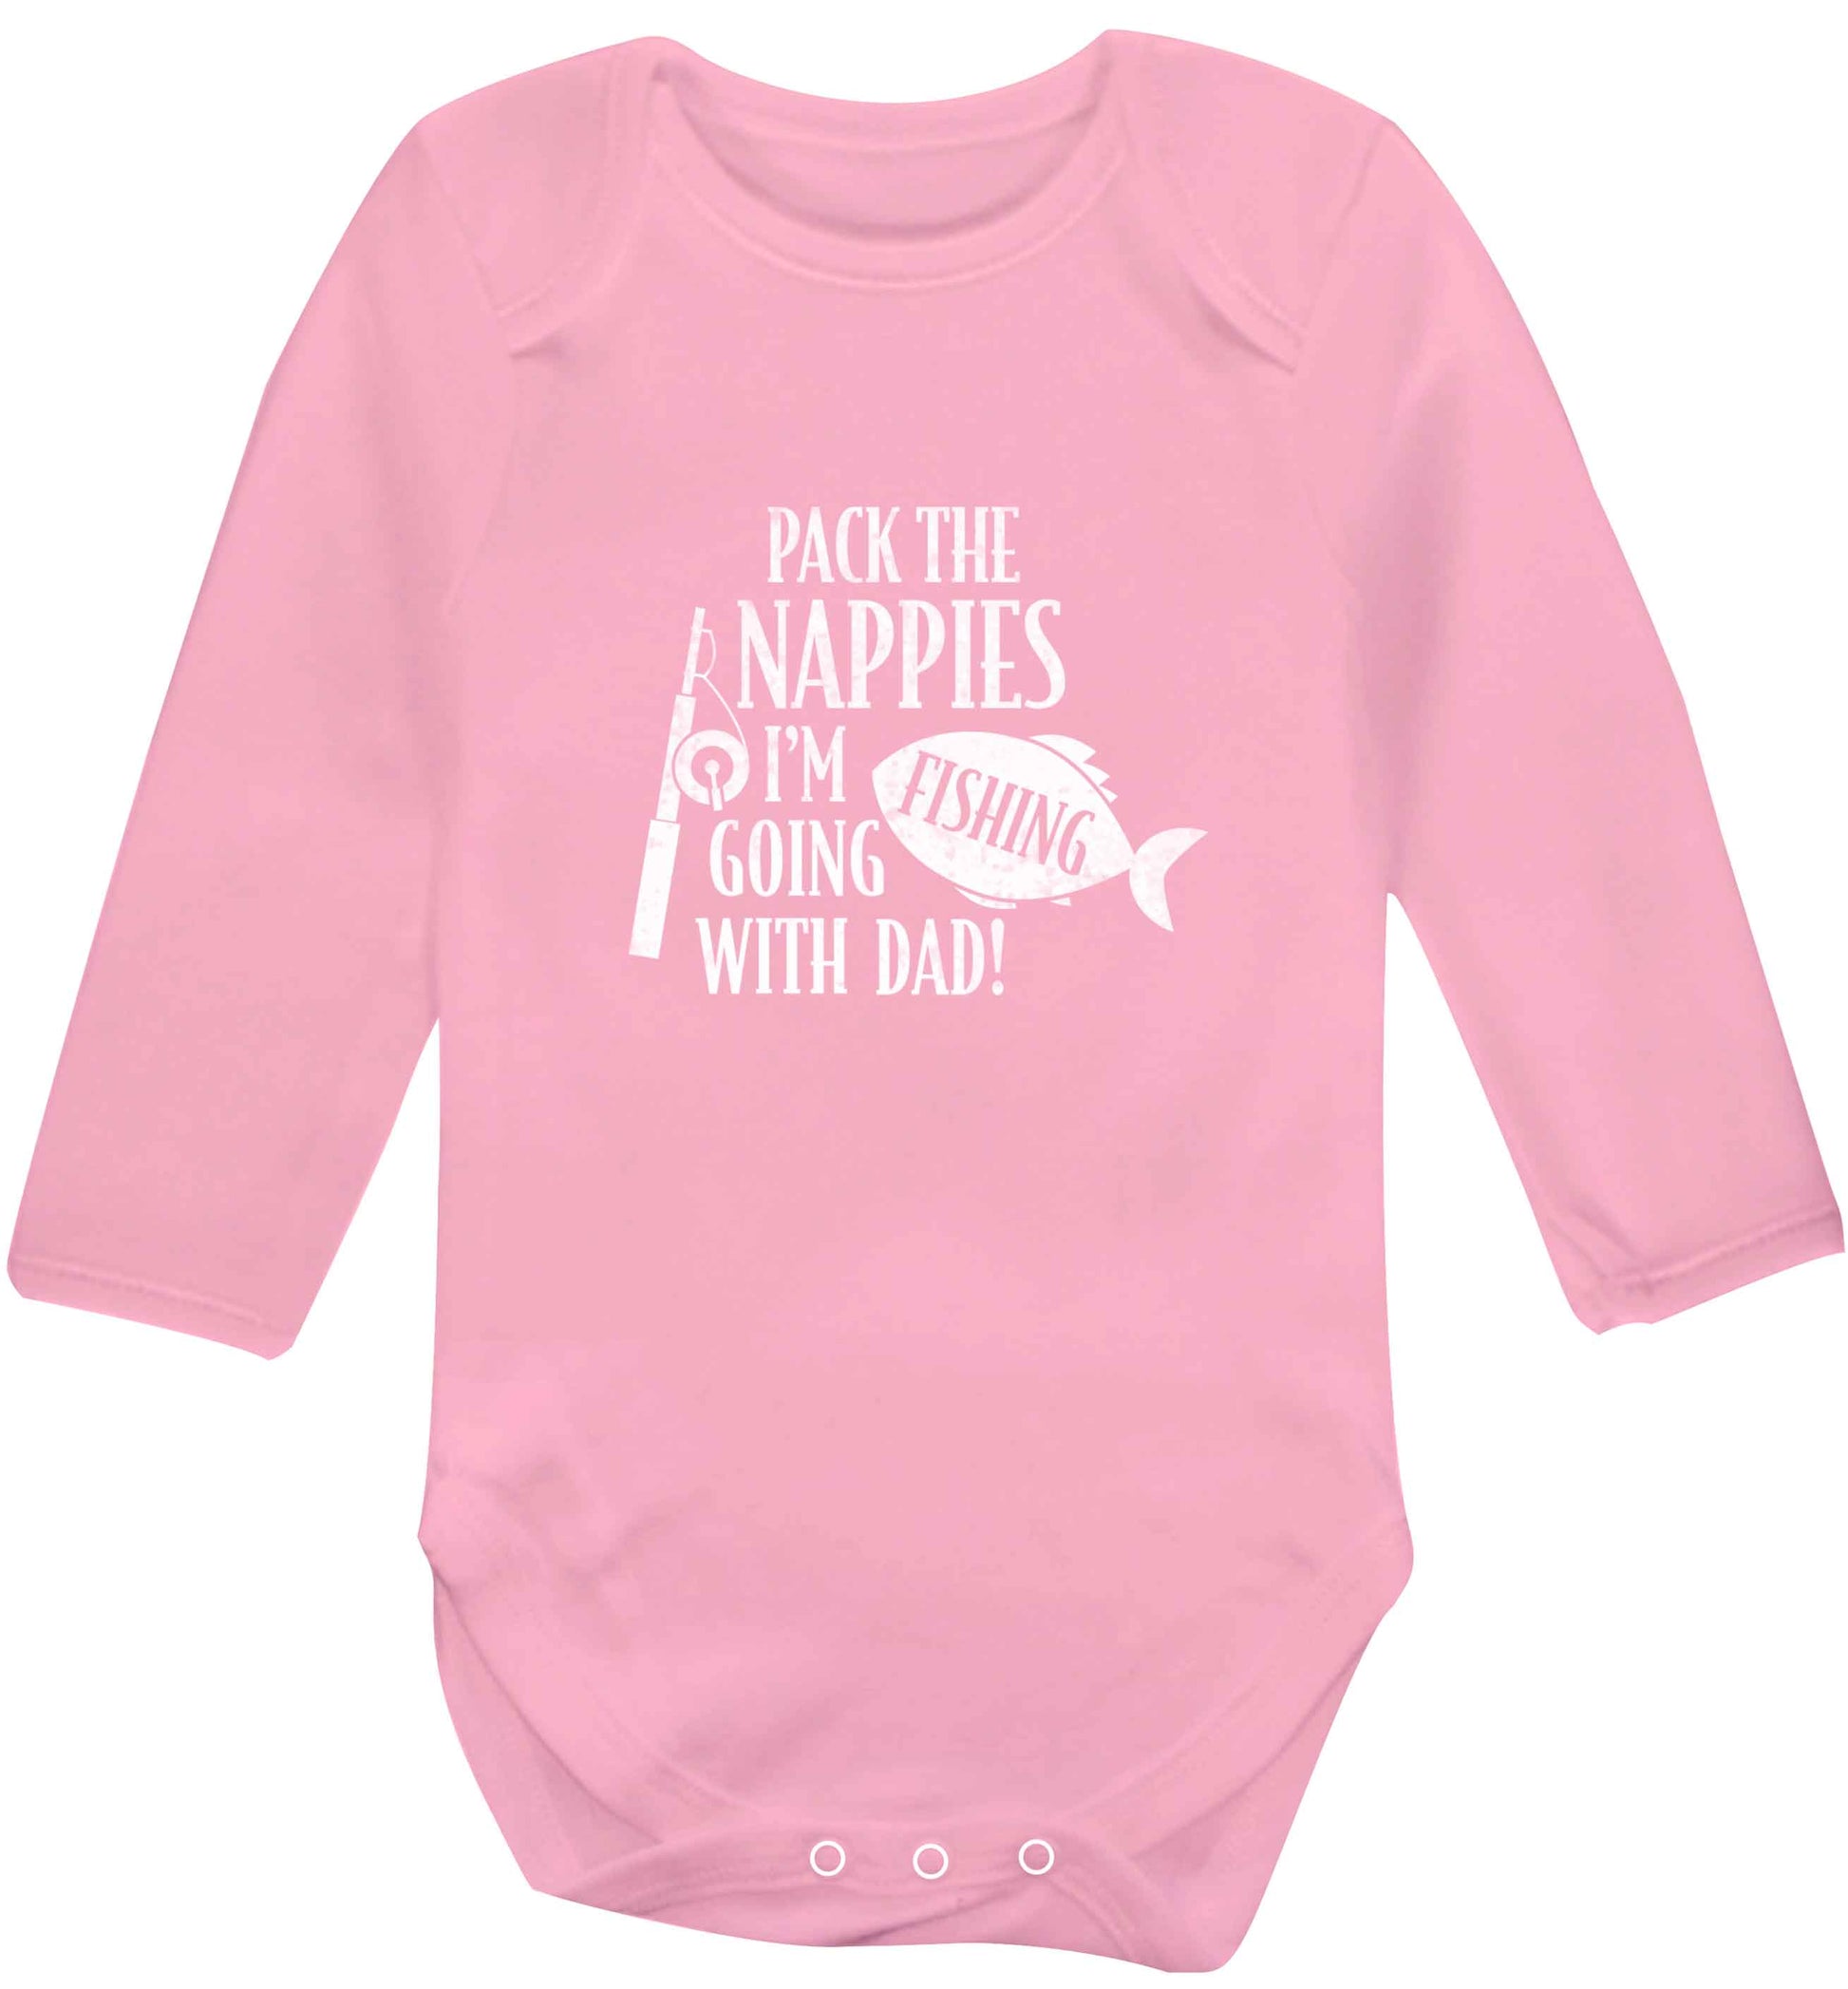 Pack the nappies I'm going fishing with Dad baby vest long sleeved pale pink 6-12 months